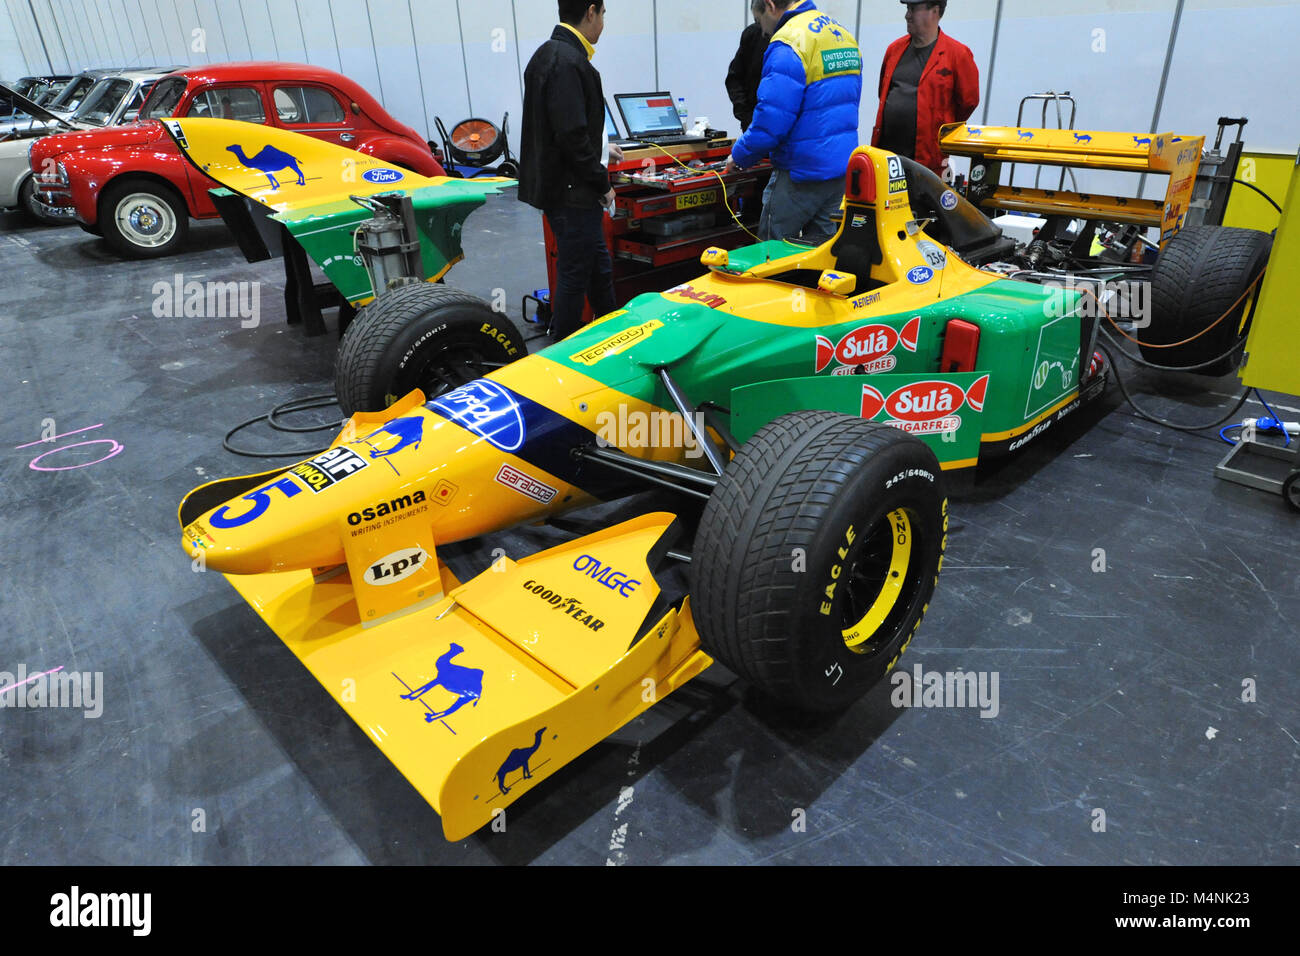 Benetton 193b High Resolution Stock Photography and Images - Alamy